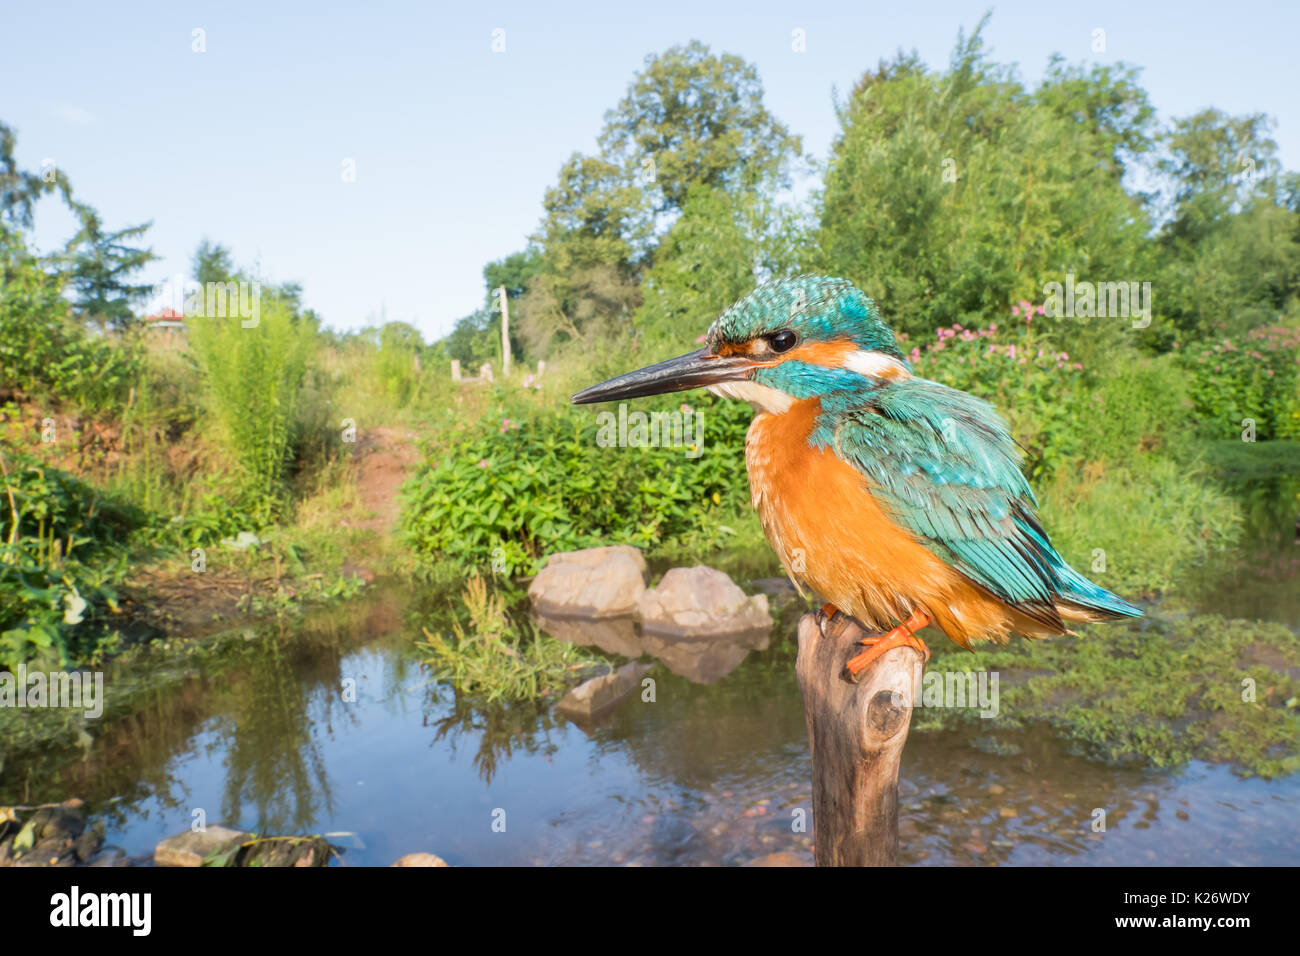 Kingfisher (Alcedo atthis) on branch in his habitat, wide angle shot, Hesse, Germany Stock Photo